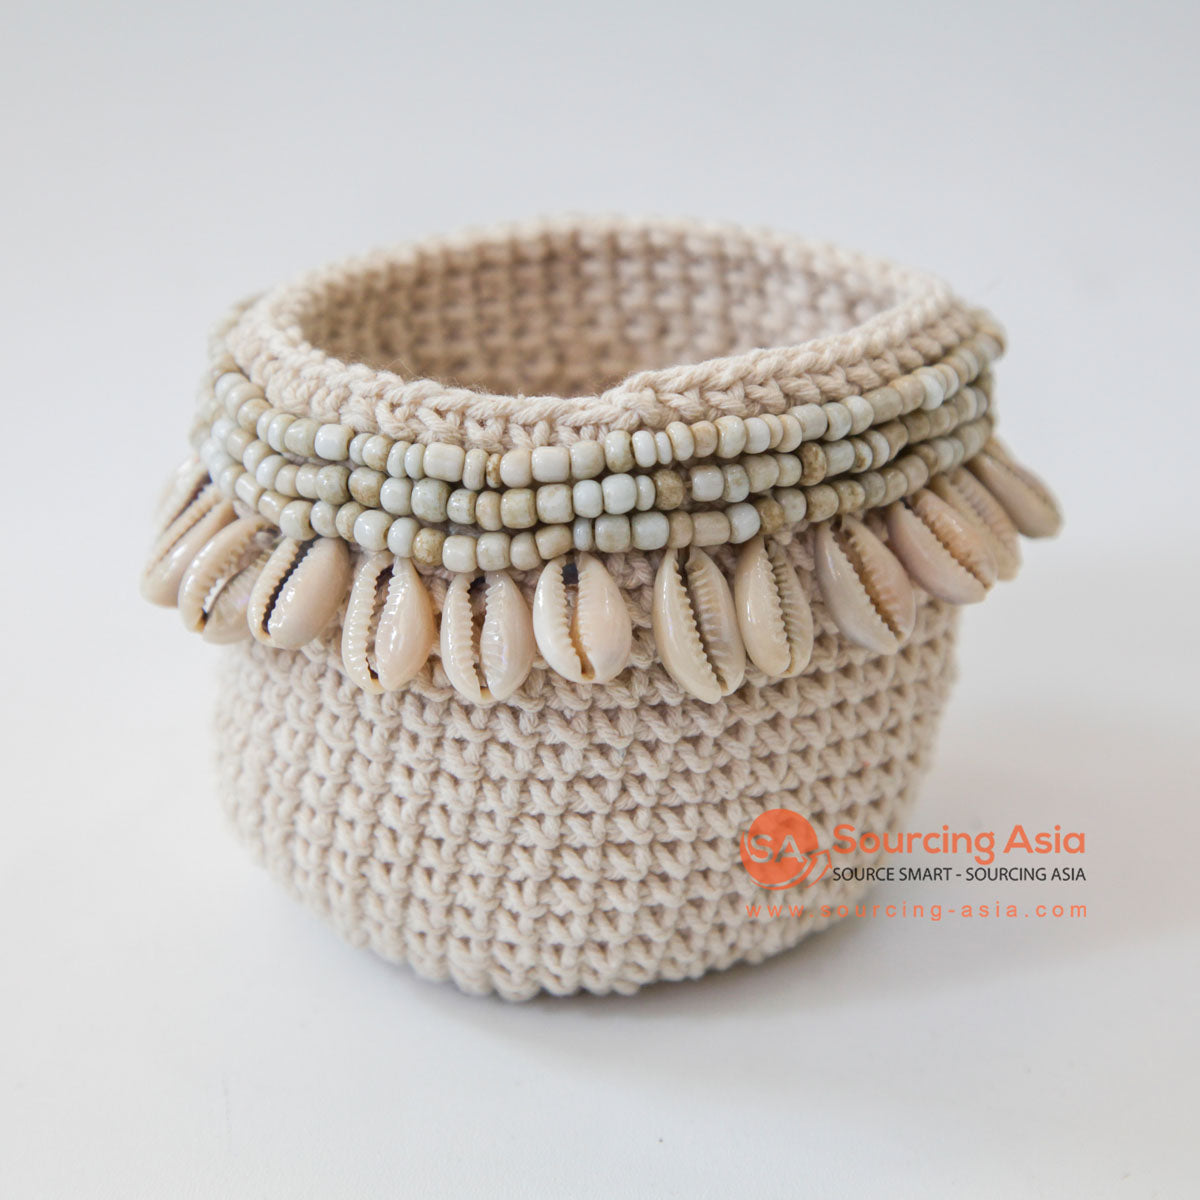 DHL108 CREAM MACRAME AND SHELL SMALL BASKET